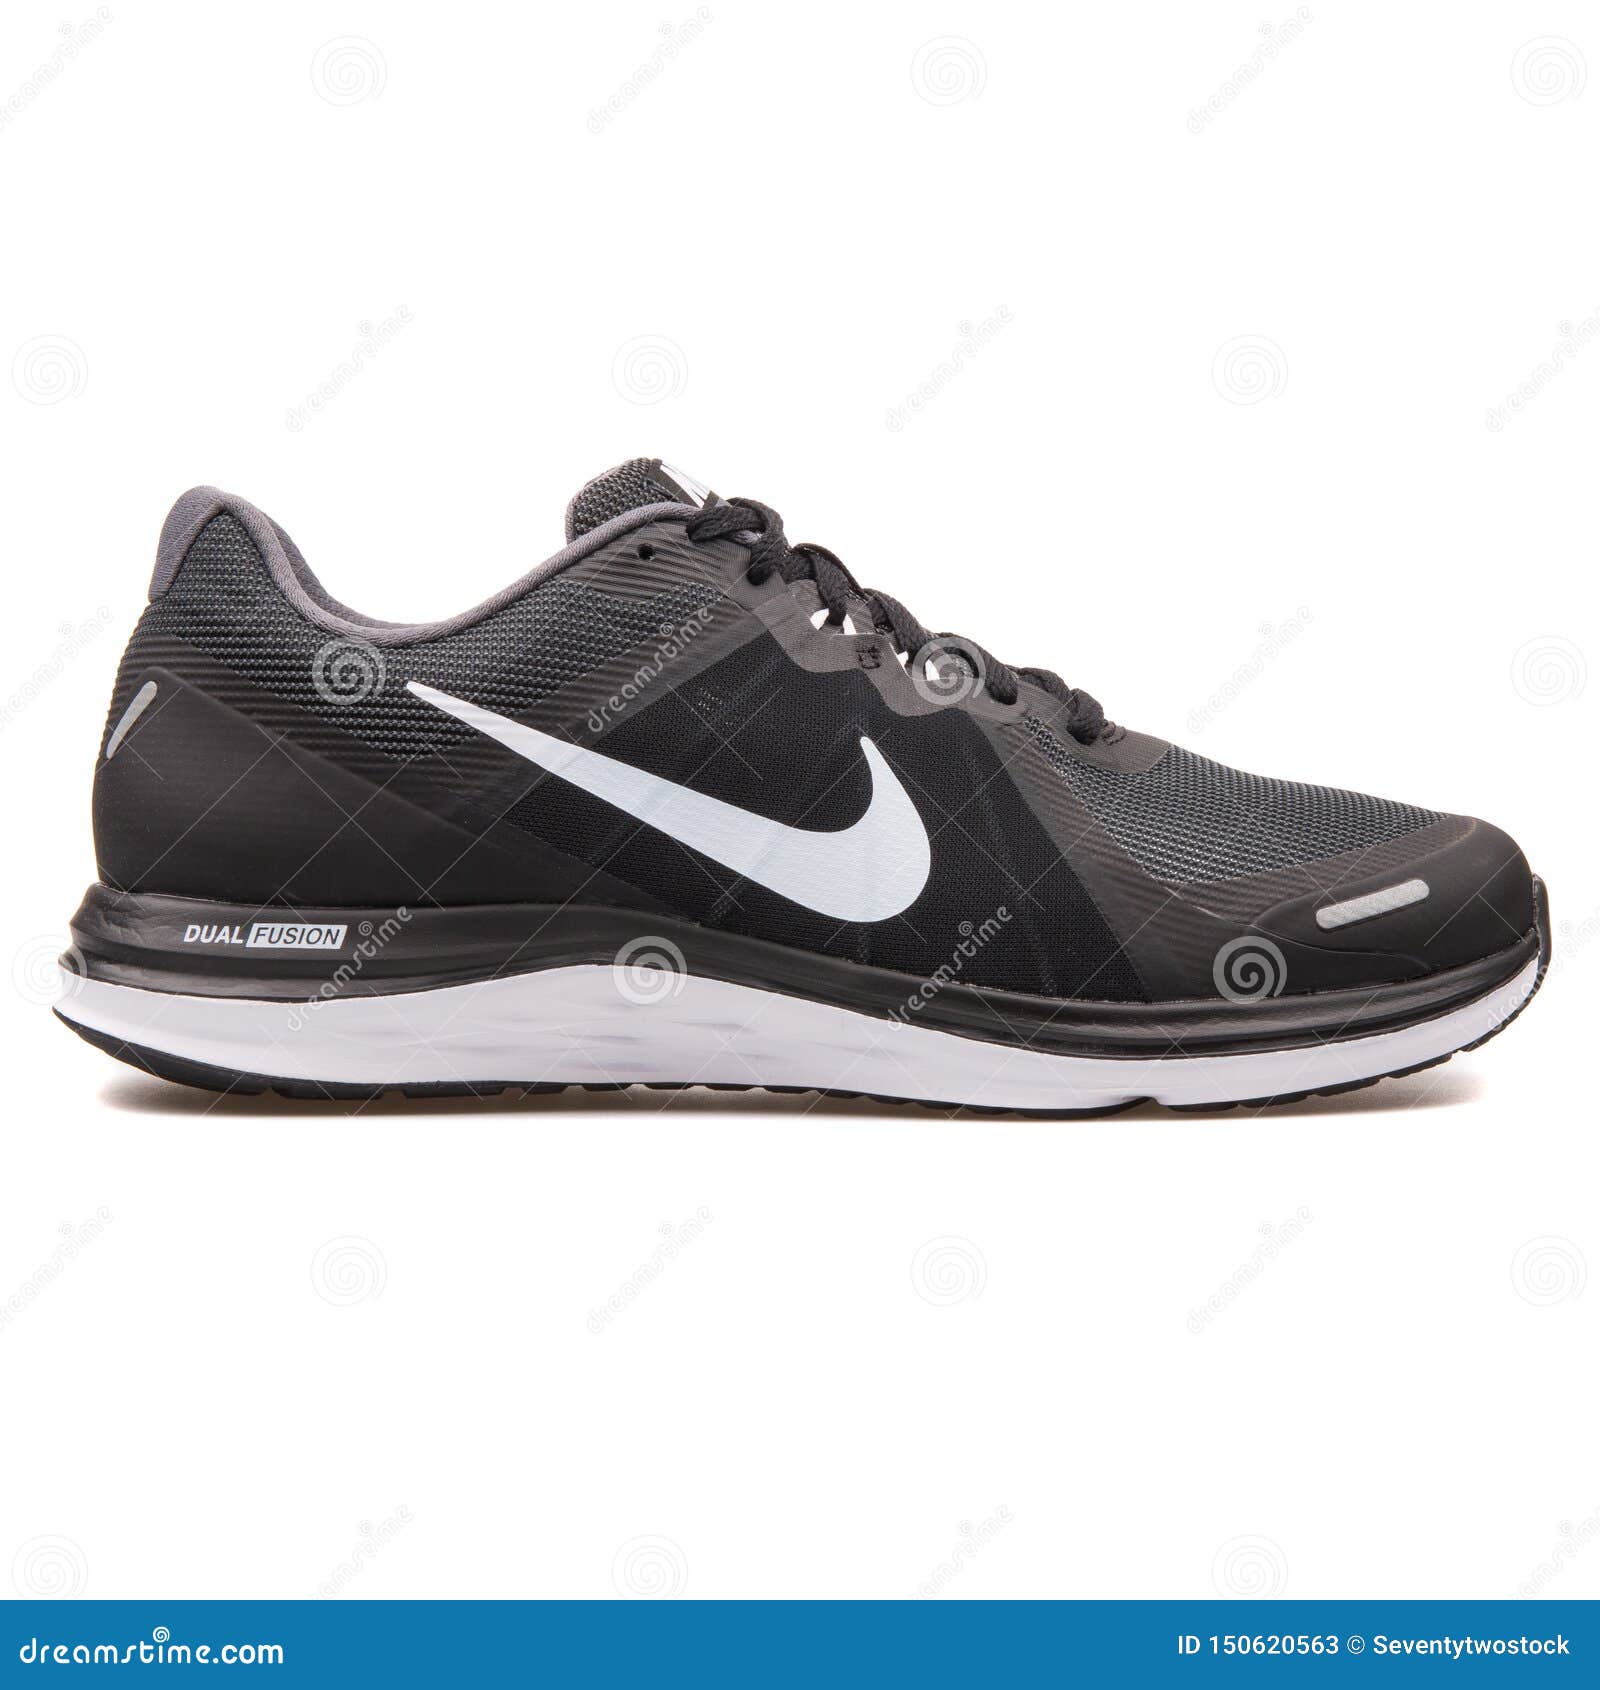 Nike Dual Fusion X 2 Black and White Sneaker Editorial Stock - Image of casual, dual: 150620563